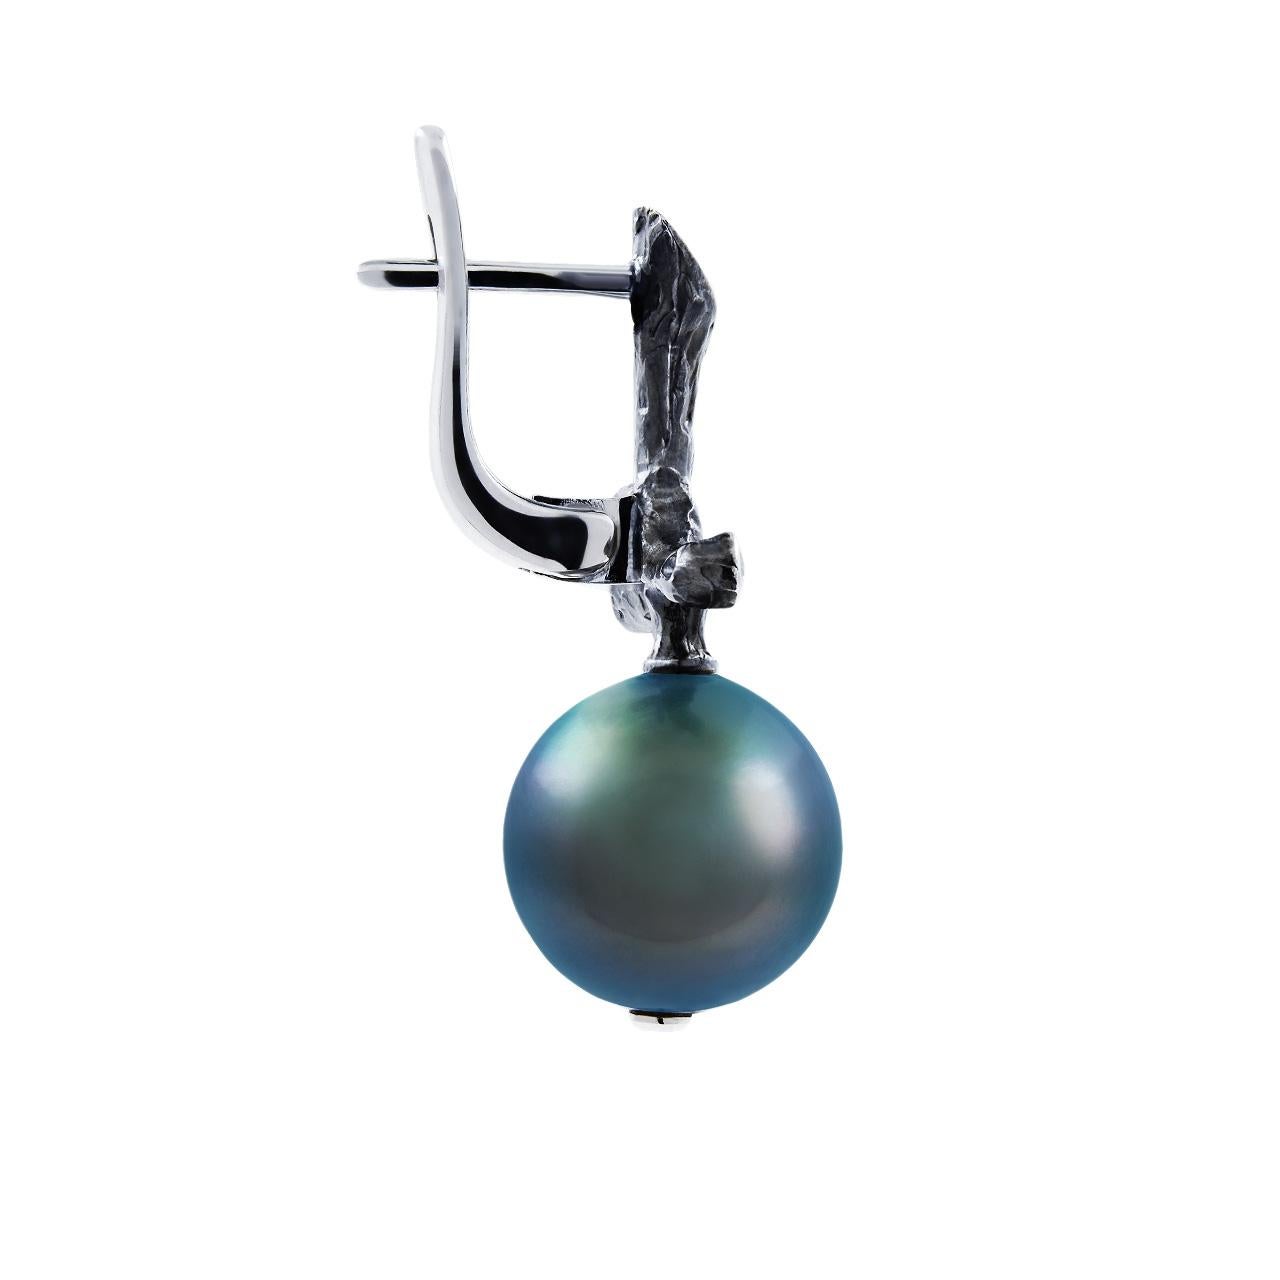 - 36 Round Diamonds - 0.23 ct, E-F/VS
- 11.5-12 mm Dark Tahitian pearls
- 18K White Gold 
- Weight: 9.64 g
This pair of earrings from the Eden collection features two Dark Tahitian pearls of 11.5-12 mm diameter. The design is complete with 36